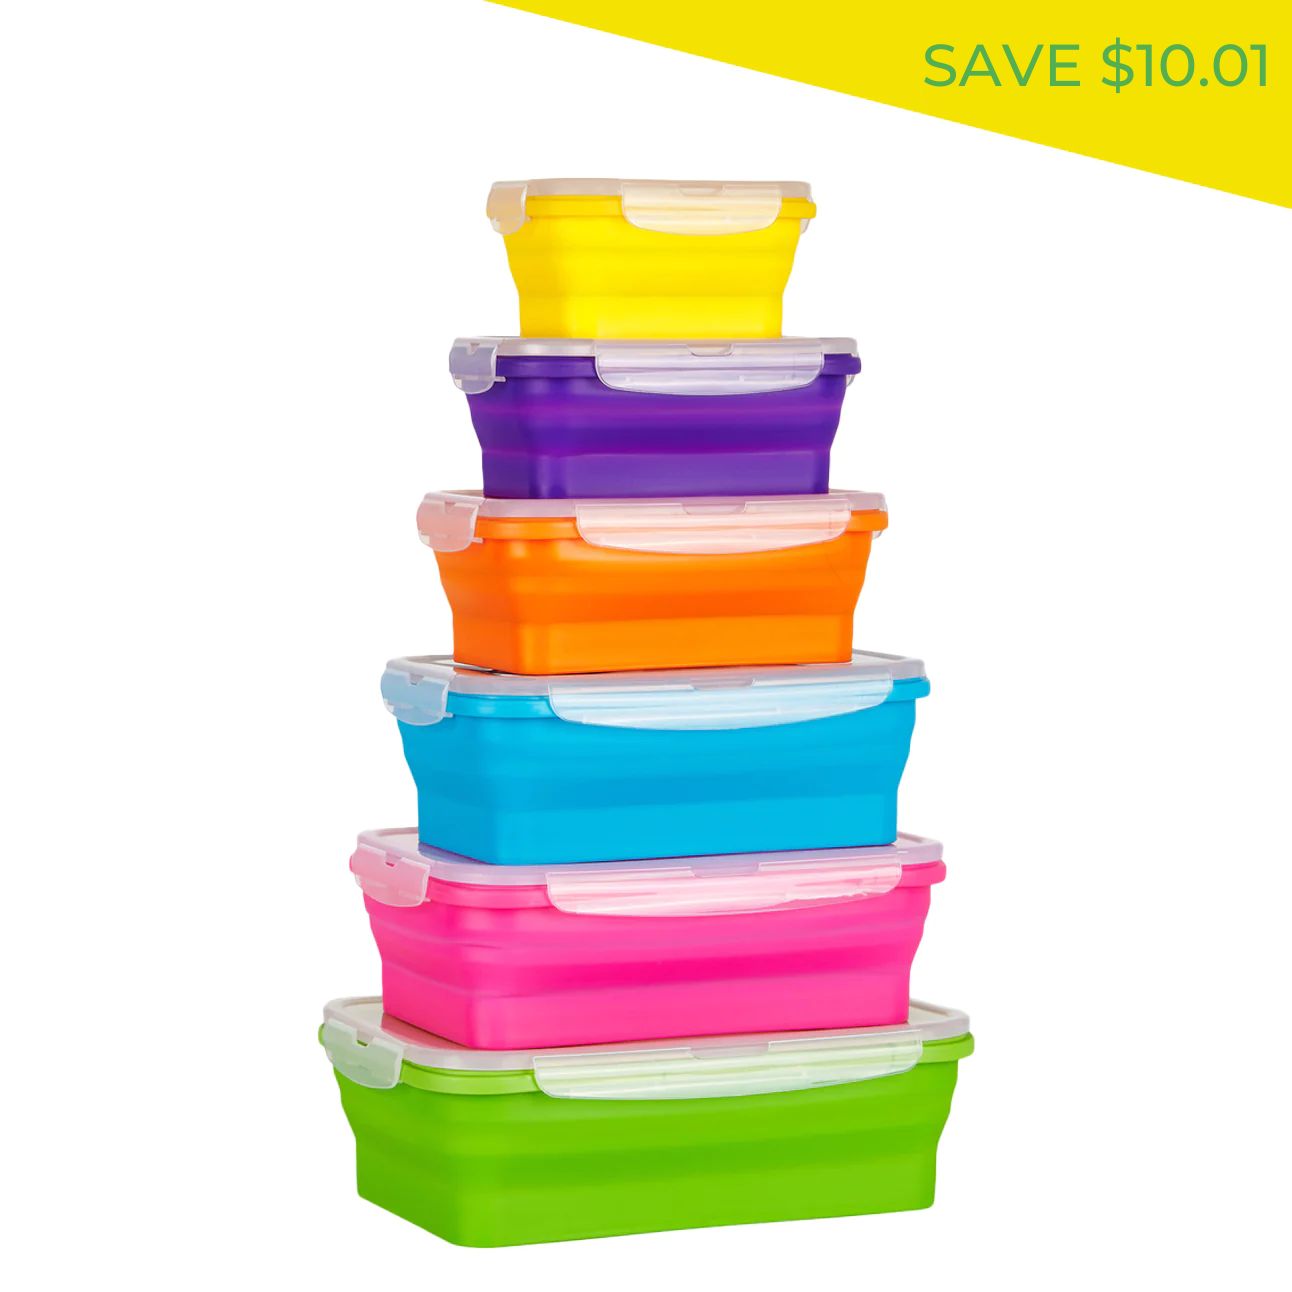 Silicone Storage Containers, L/XL (set of 2)